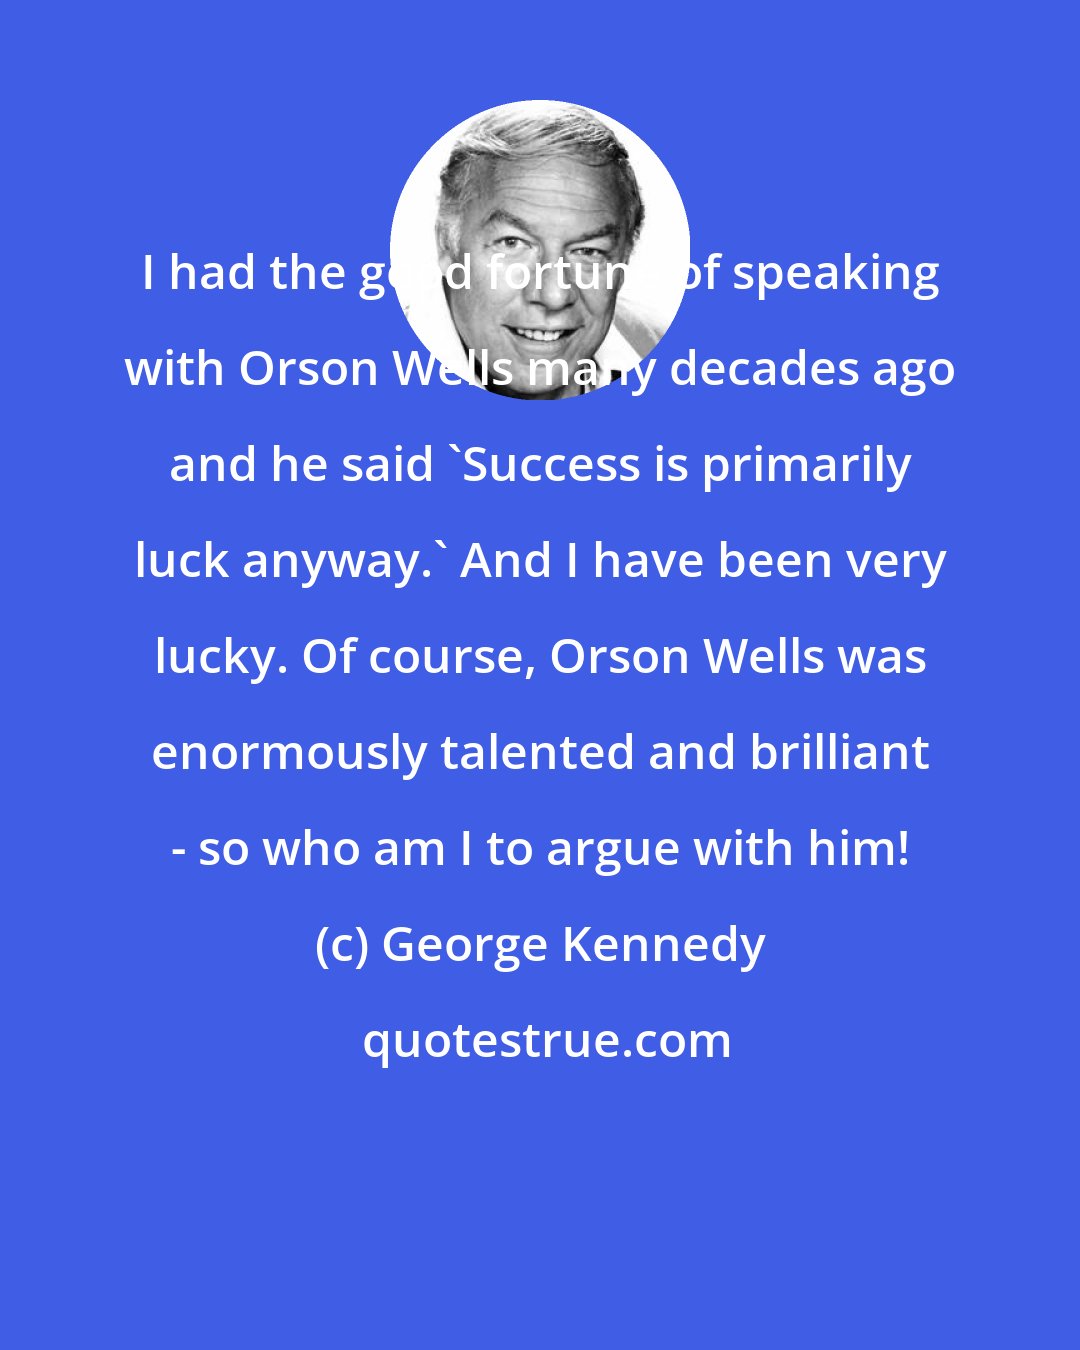 George Kennedy: I had the good fortune of speaking with Orson Wells many decades ago and he said 'Success is primarily luck anyway.' And I have been very lucky. Of course, Orson Wells was enormously talented and brilliant - so who am I to argue with him!